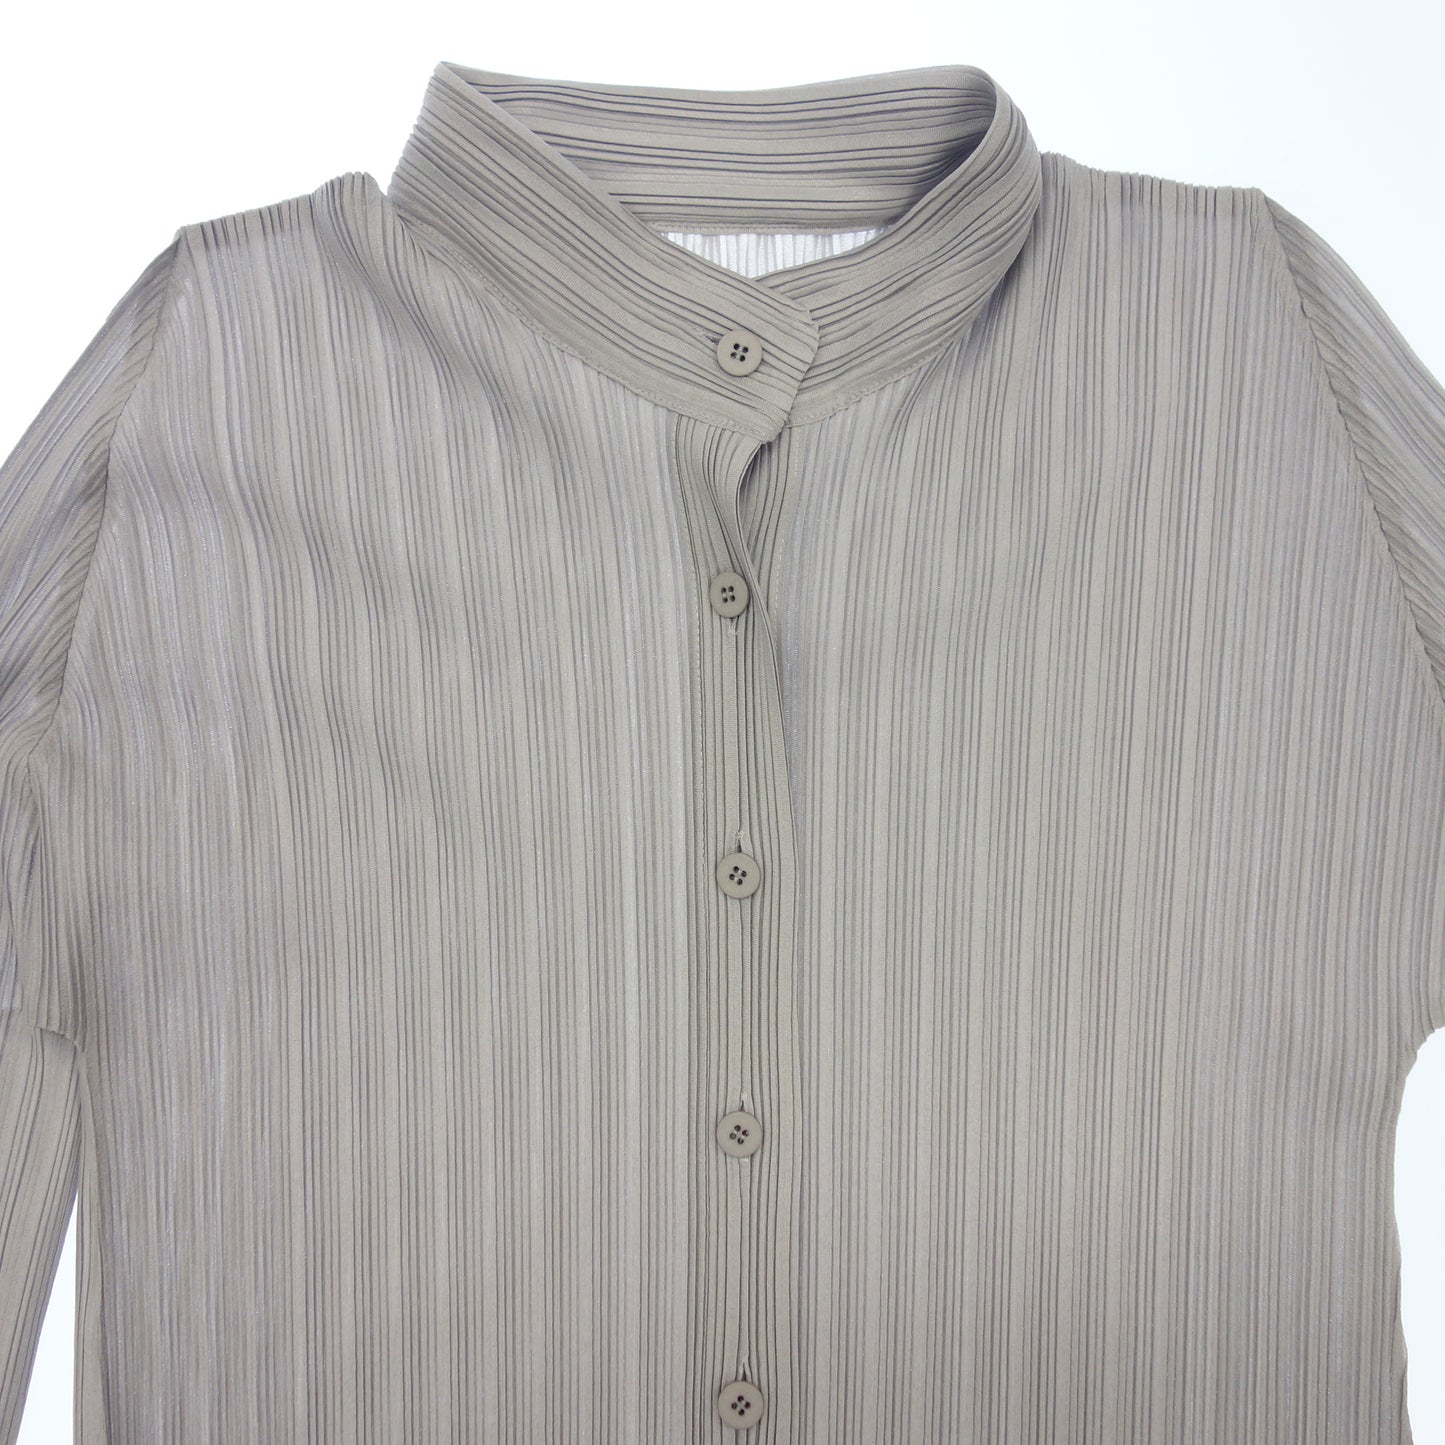 Very good condition ◆ Pleats Please long sleeve shirt Ladies size 03 Gray PLEATS PLEASE [AFB5] 